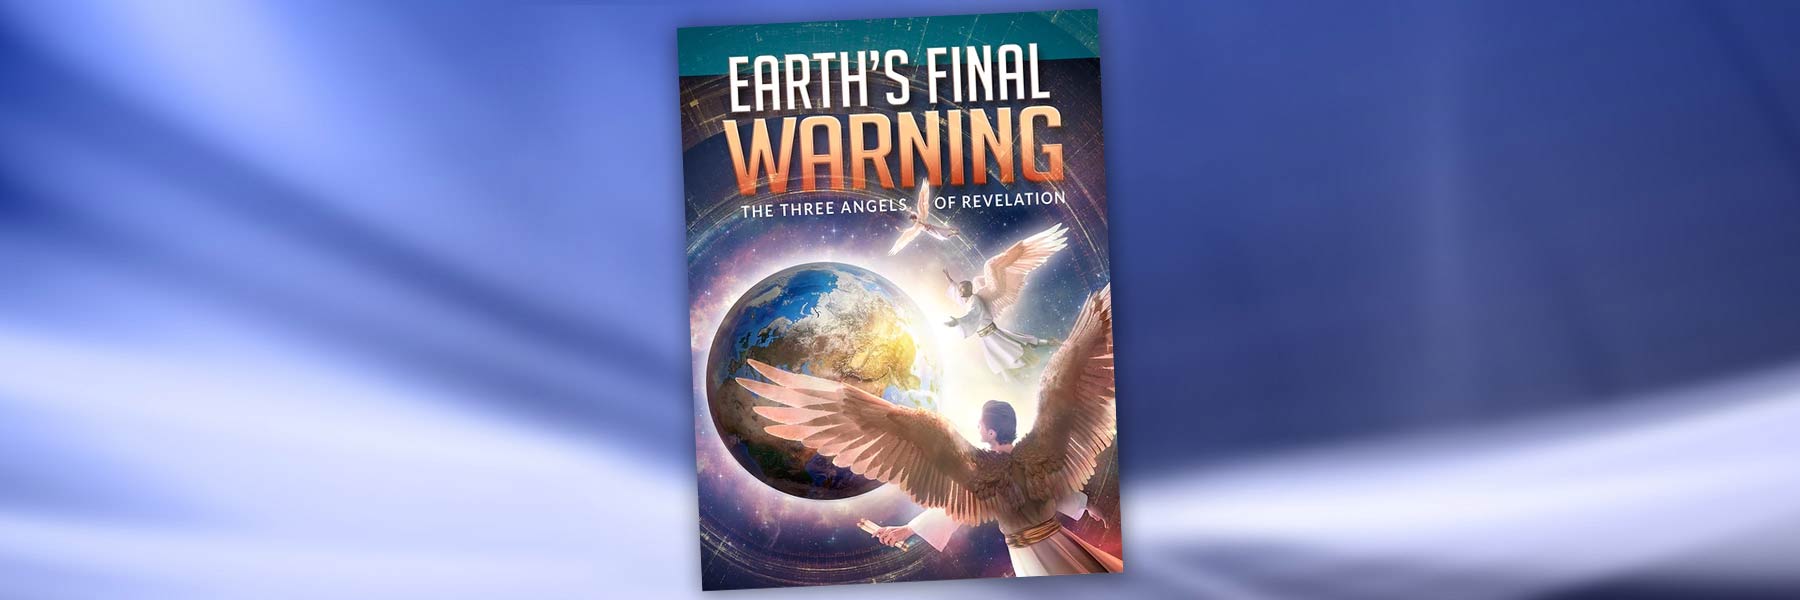 Brand New! Earth's Final Warning: The Three Angels of Revelation Magaz